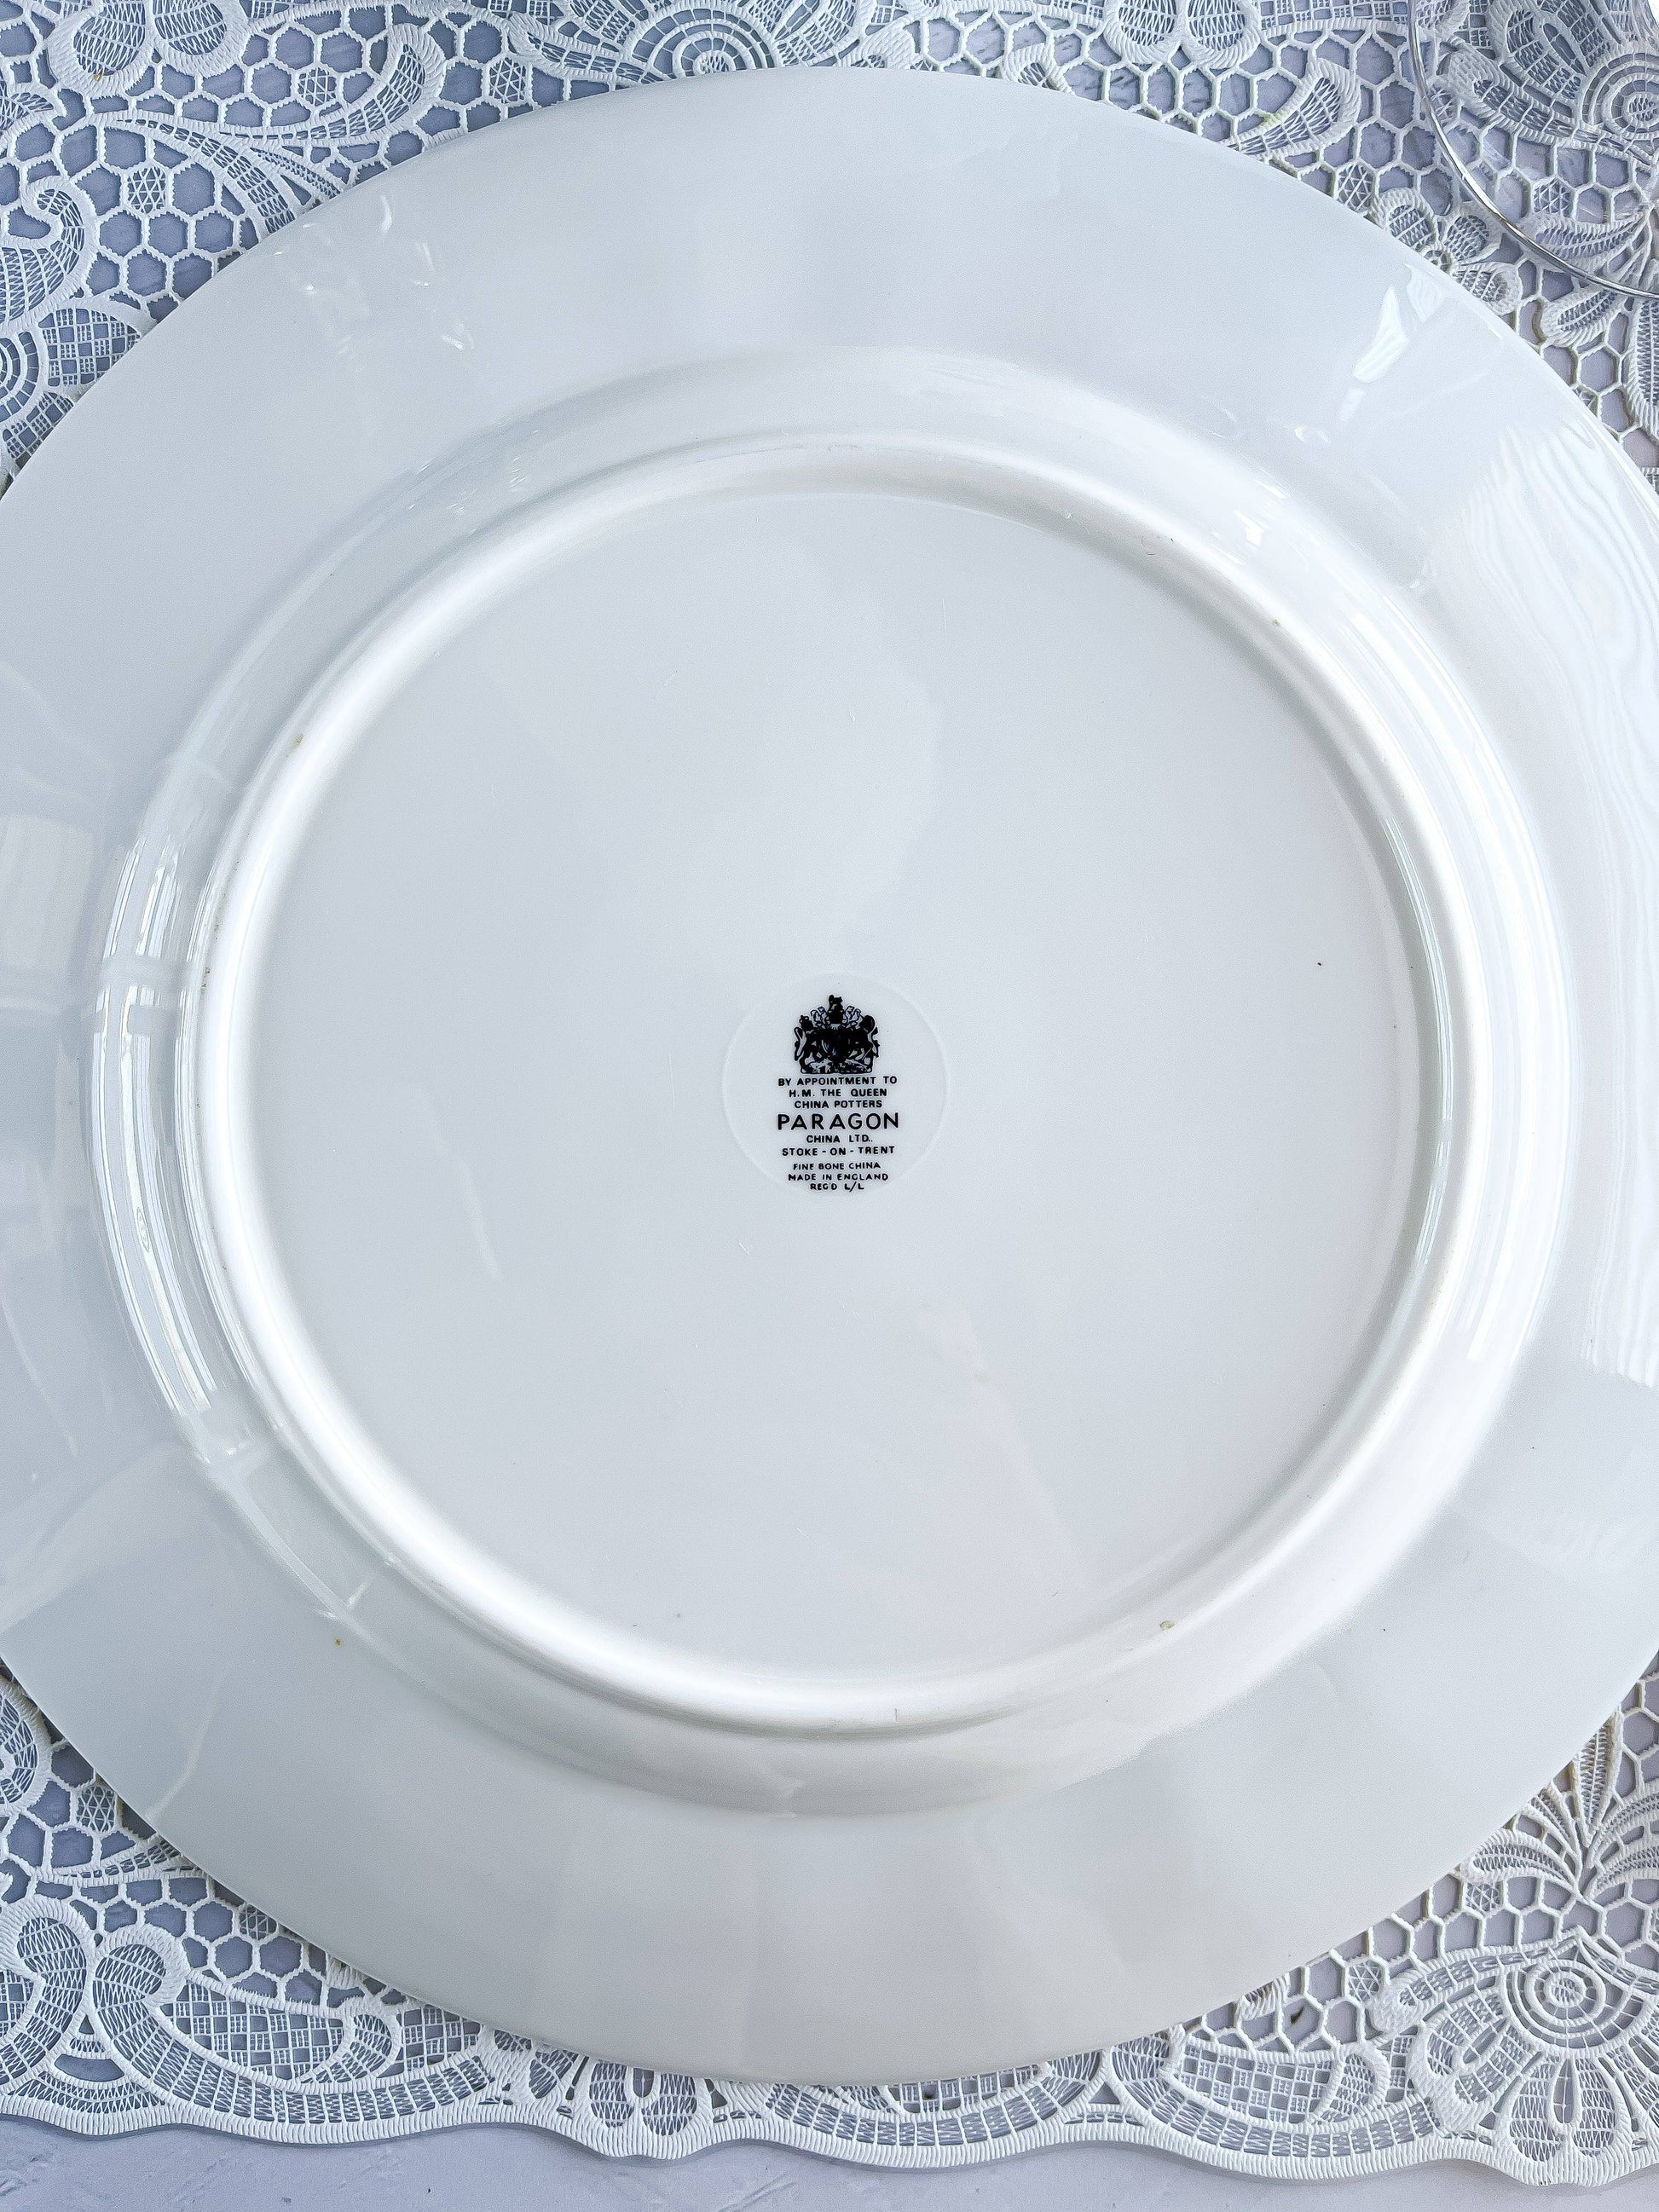 Paragon Dinner Plate - Unnamed Pattern with Gold Trim - SOSC Home